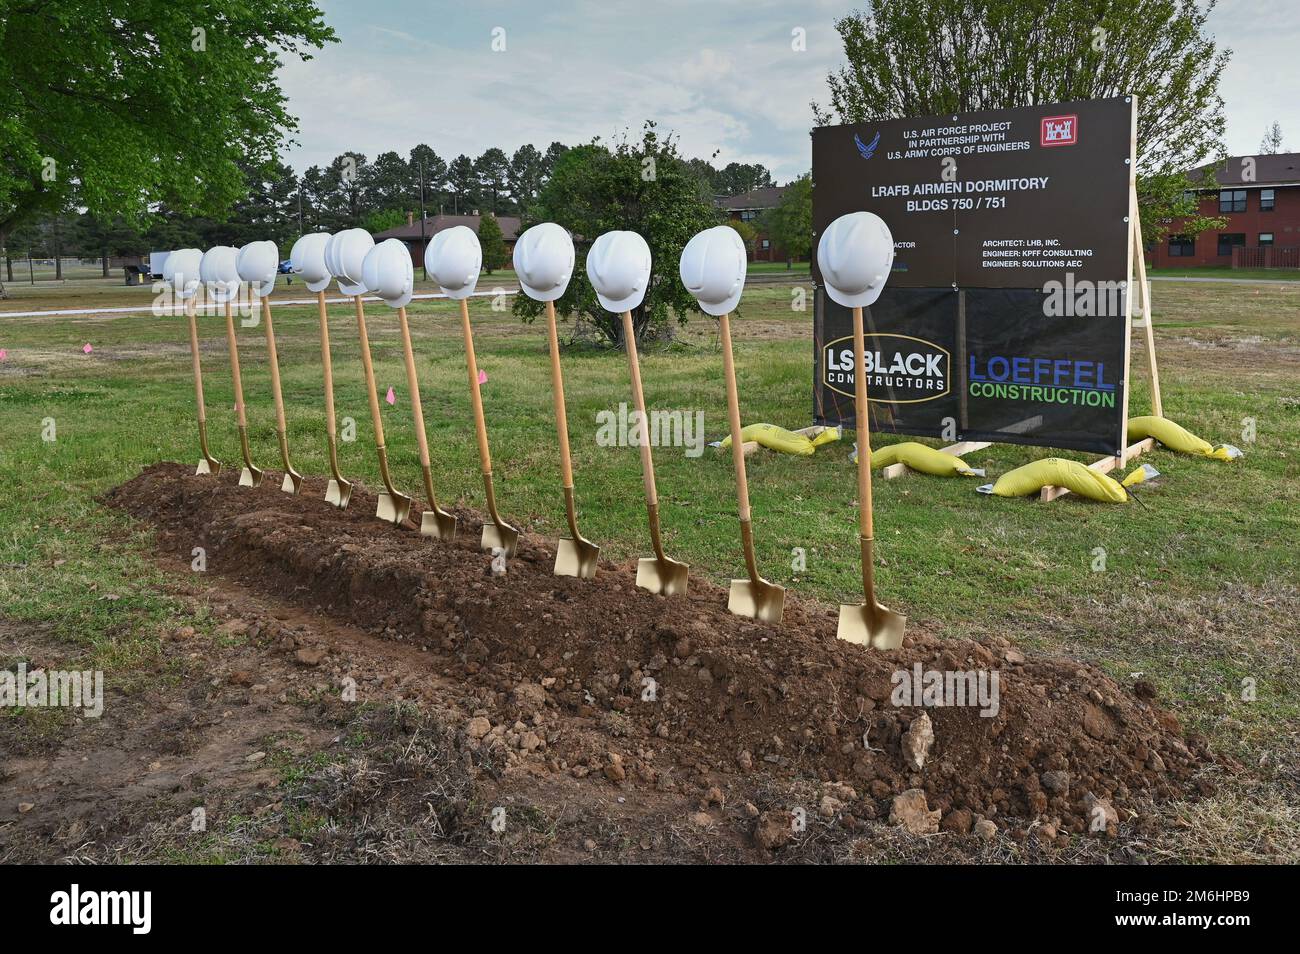 A row of shovels and hardhats is placed at the site of a new dormitory construction project during a groundbreaking ceremony at Little Rock Air Force Base, Arkansas, April 28, 2022. The $32 million project will construct two three-story permanent party enlisted dormitories to house 136 E-1 to E-4 military personnel in single occupancy dorms. Stock Photo